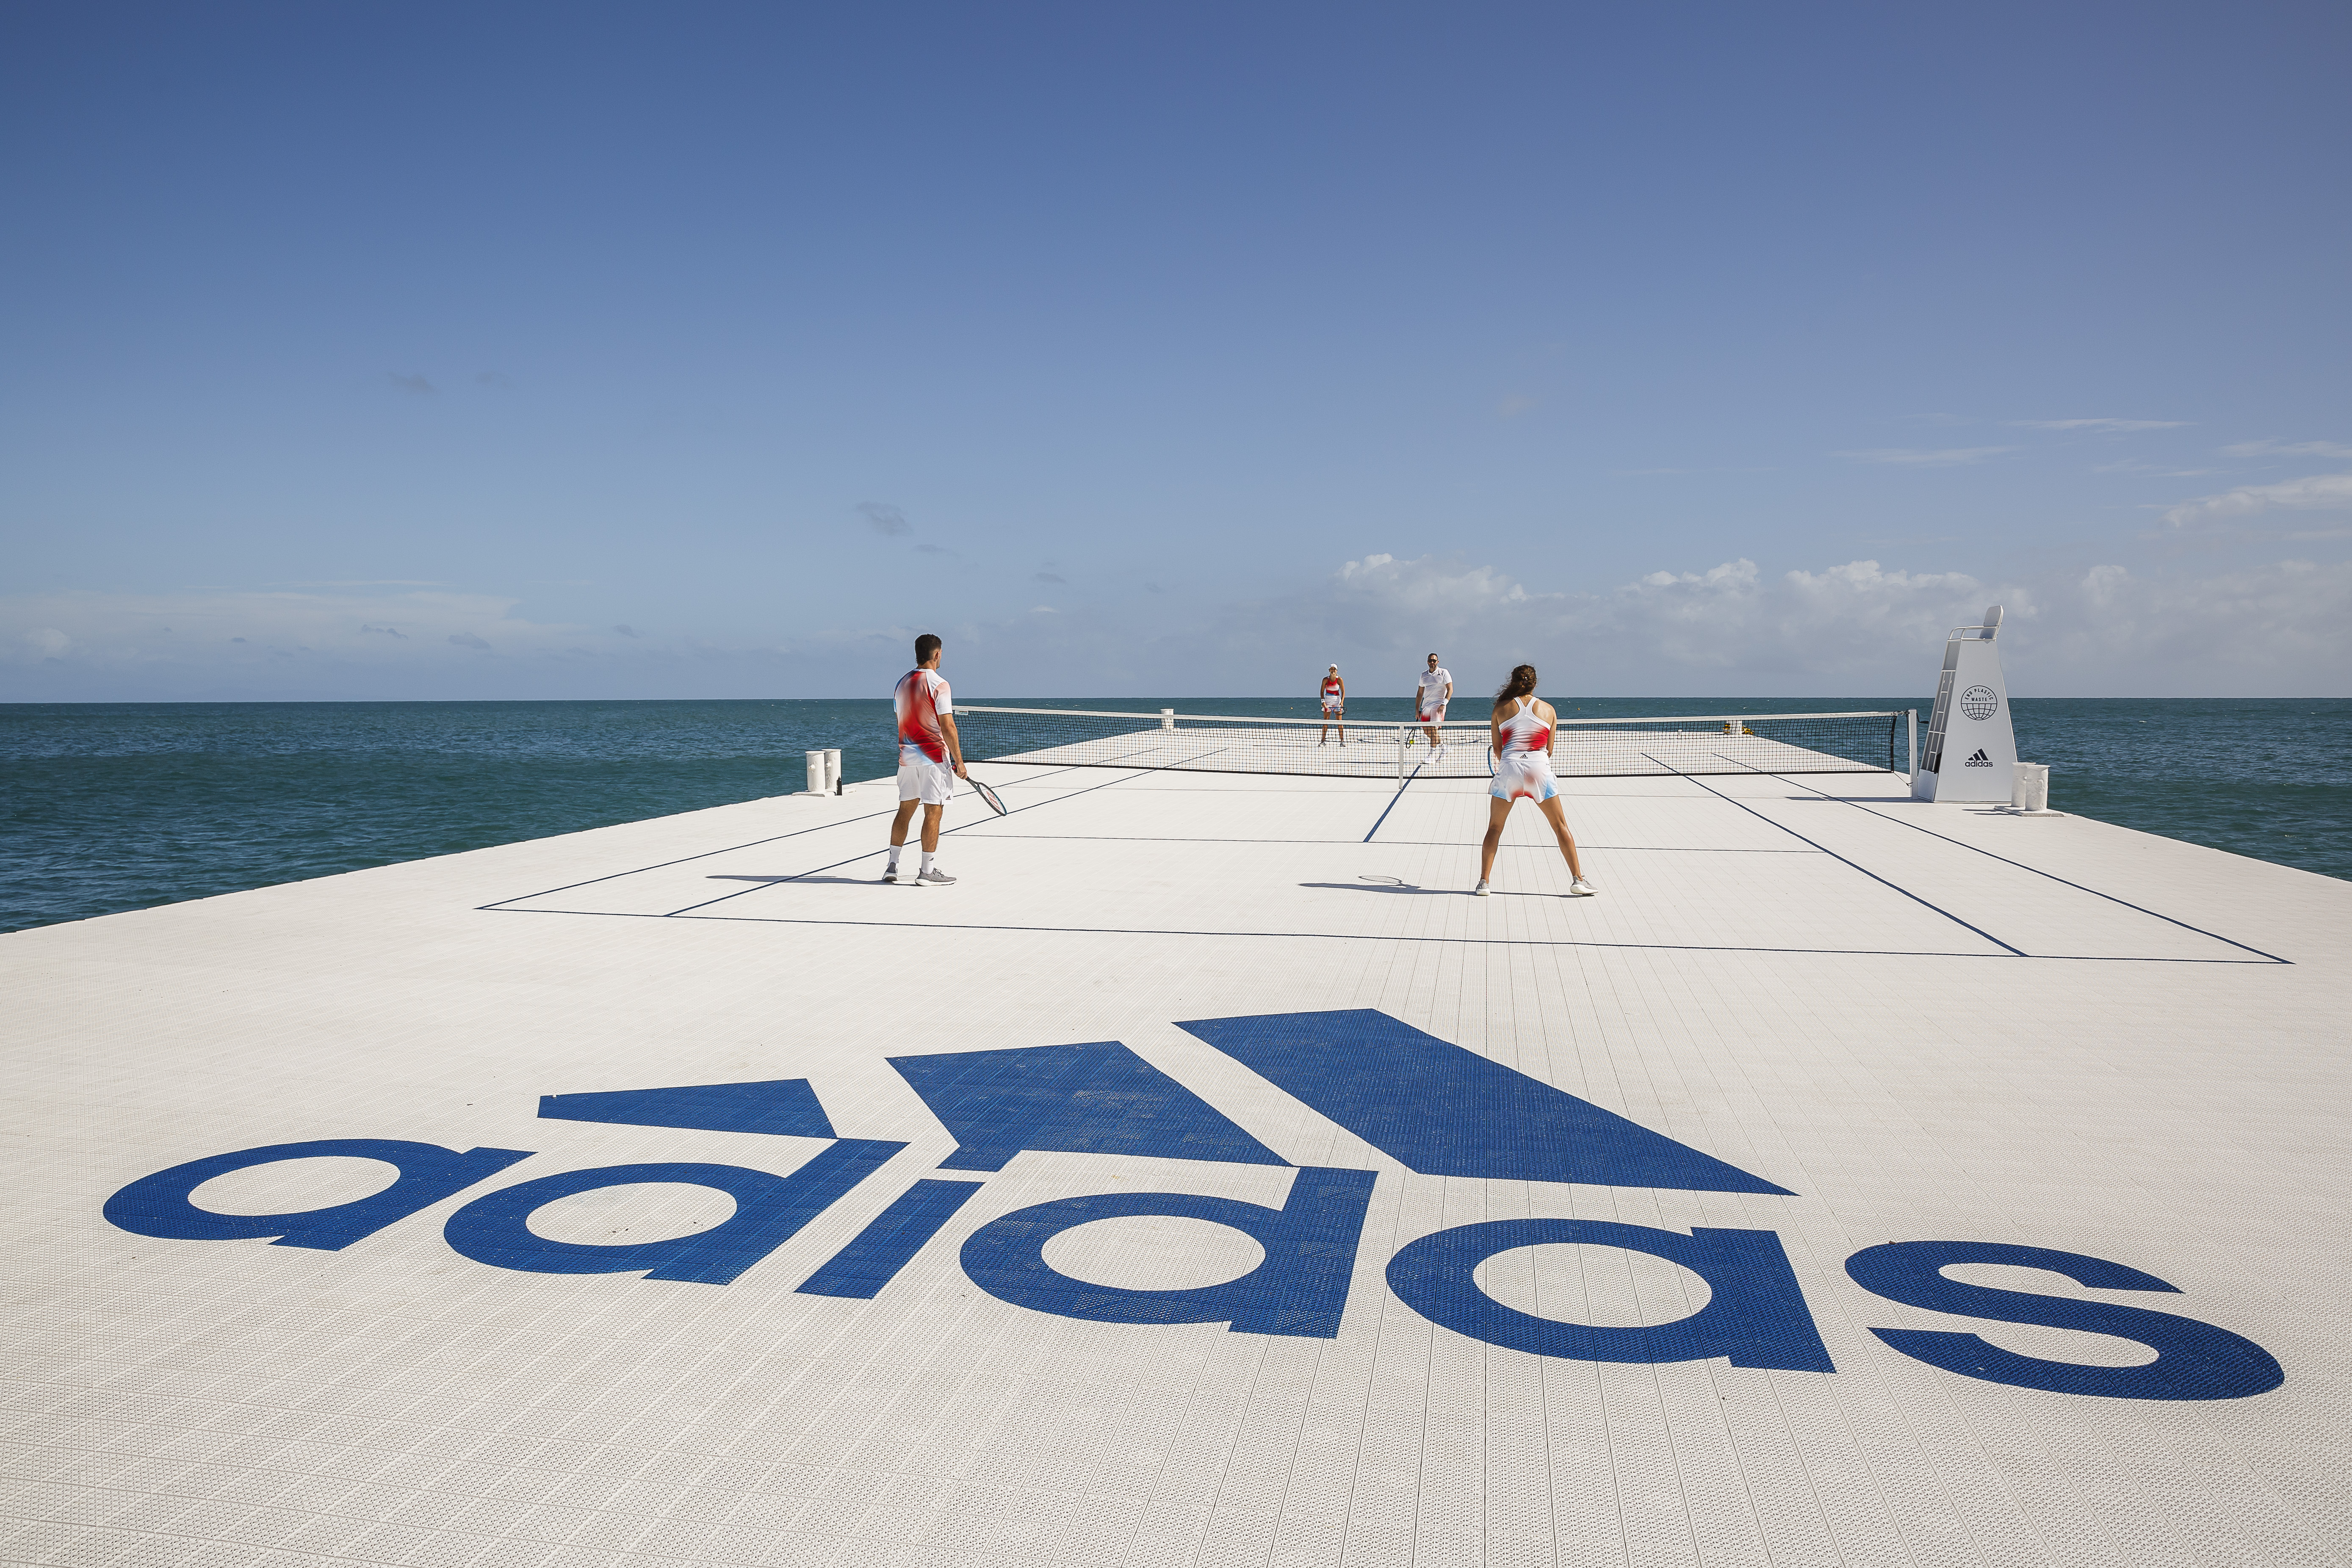 How Adidas floated a tennis court on the ocean before the ... صورة مية ريال